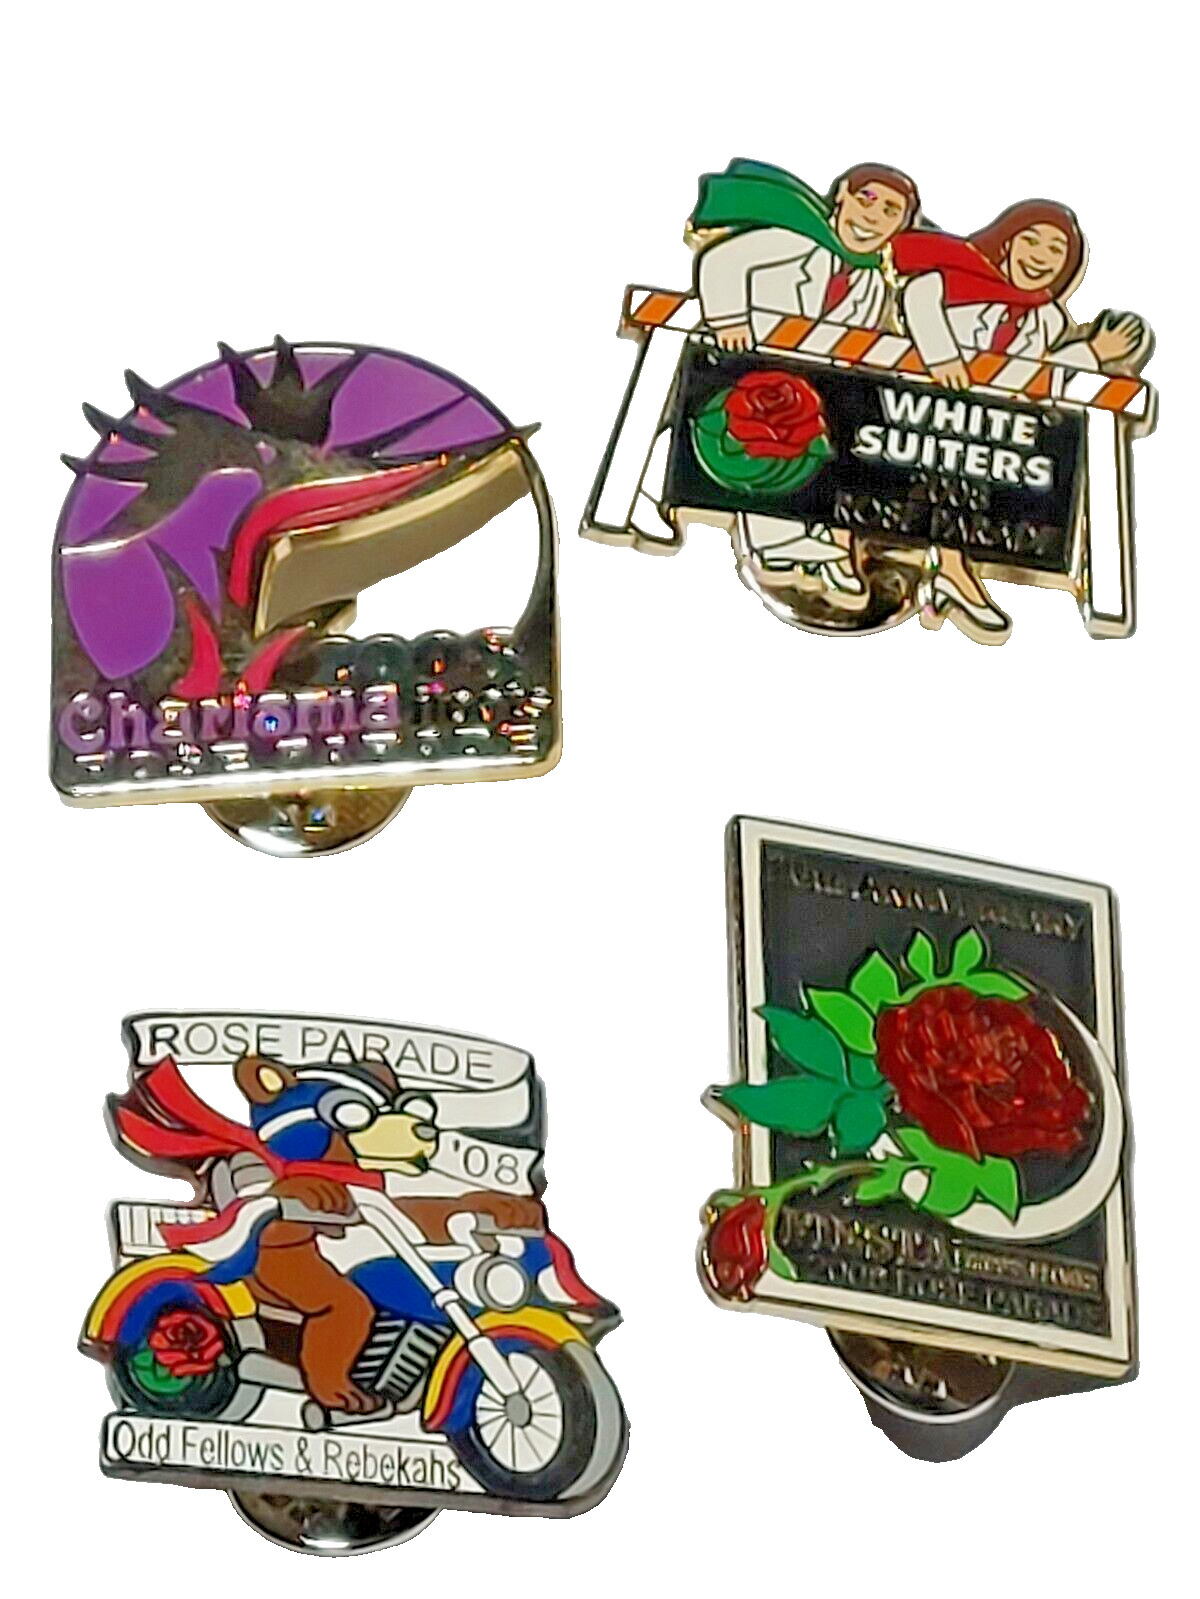 Rose Parade 2008 119th Tournament of Roses Lot of 4 Lapel Pins (101)